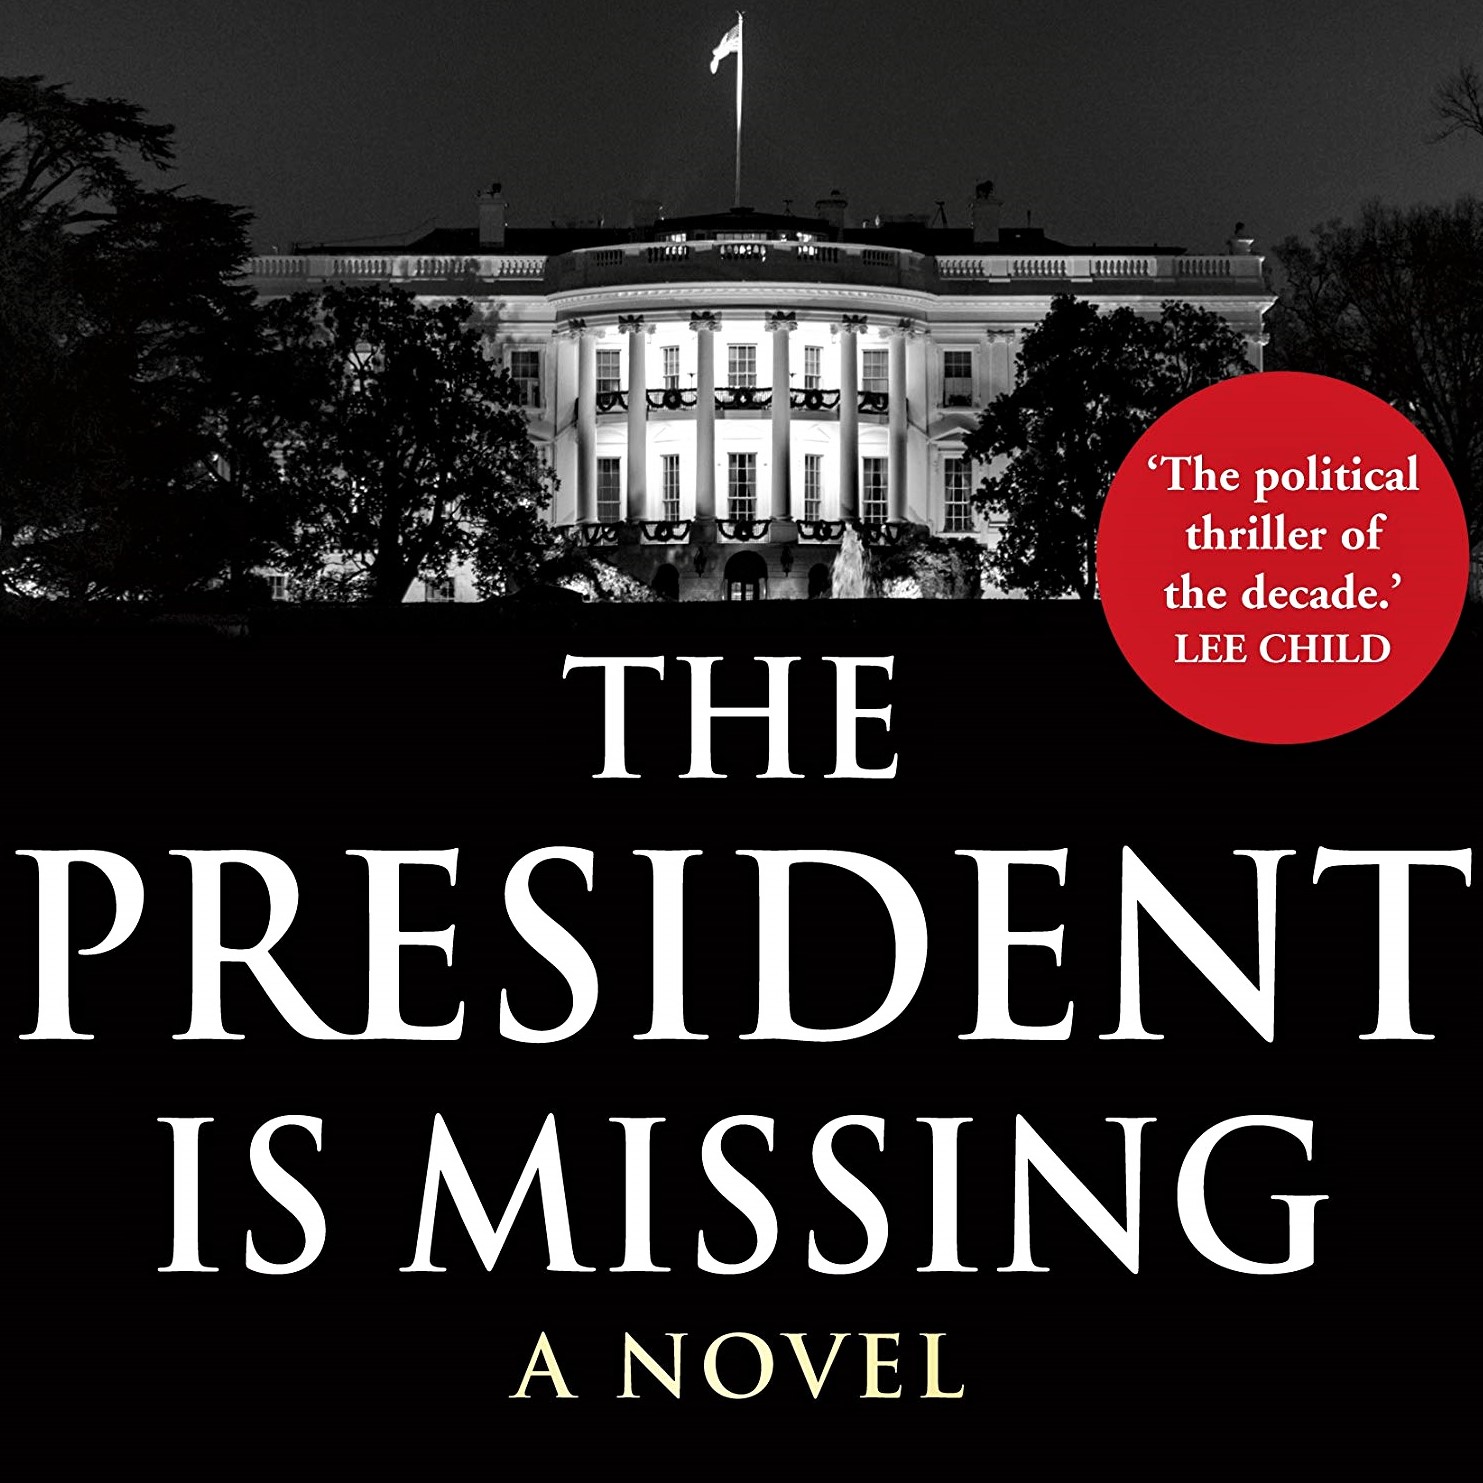 Cover image of the book 'The President Is Missing'